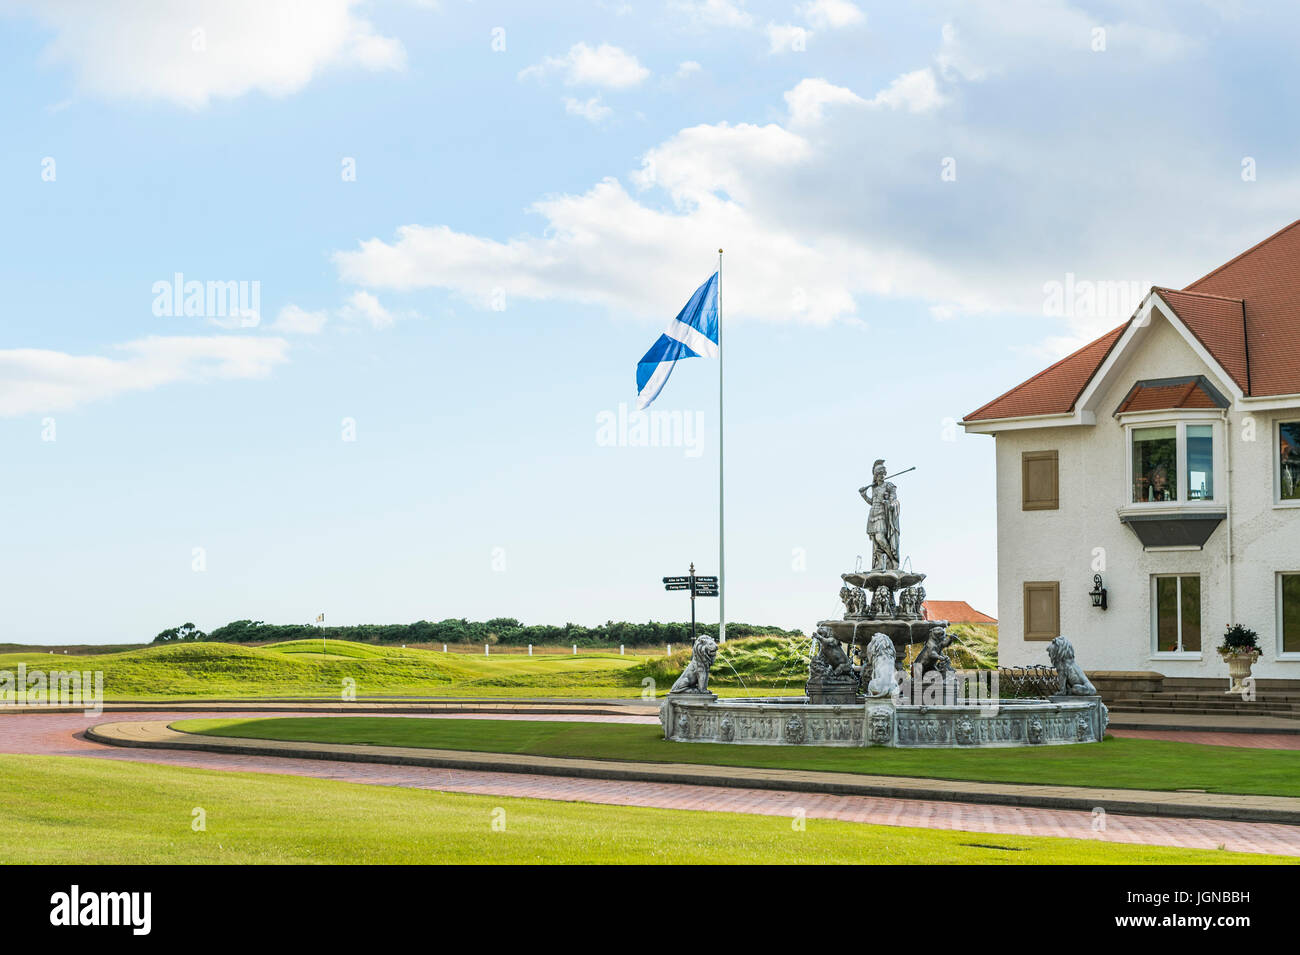 Turnberry, Scotland, UK - August 4, 2016: The fountain outside the clubhouse of the Robert the Bruce golf course at the Trump Turnberry Luxury Resort. Stock Photo